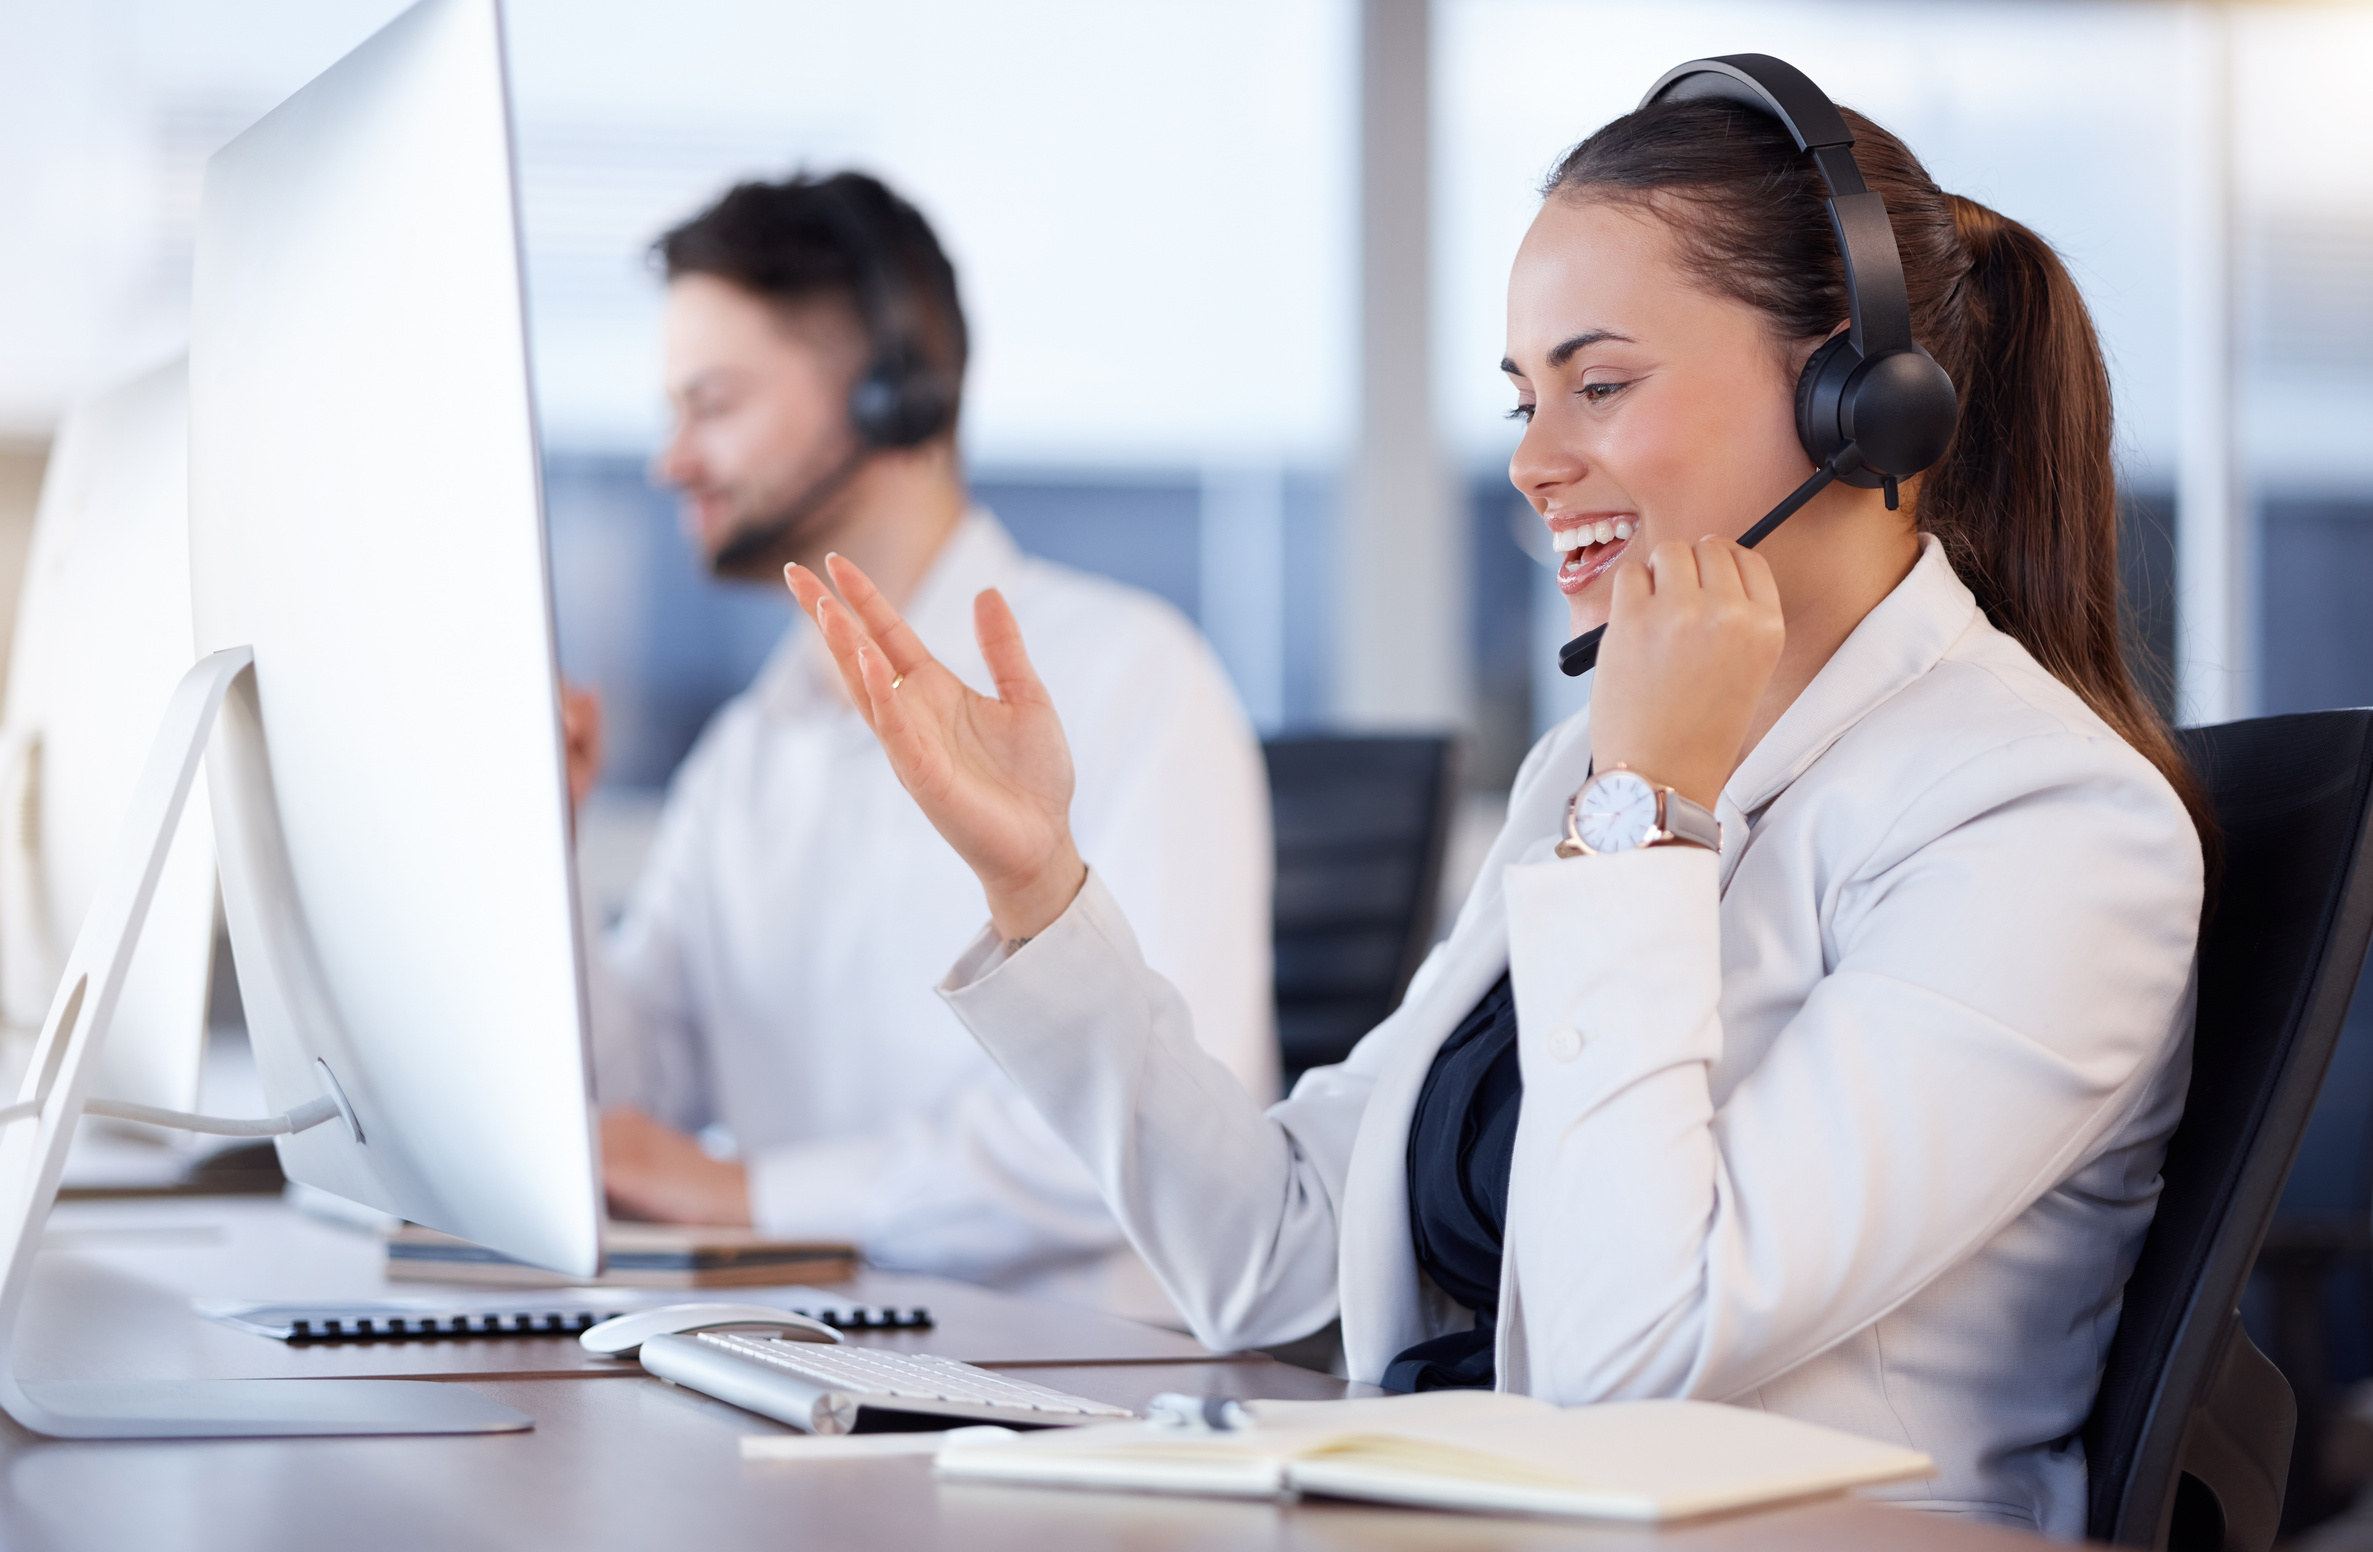 Contact us, call center or friendly woman speaking in telecom communications company in help desk. Happy smile, crm or insurance sales agent working or talking online in technical or customer support